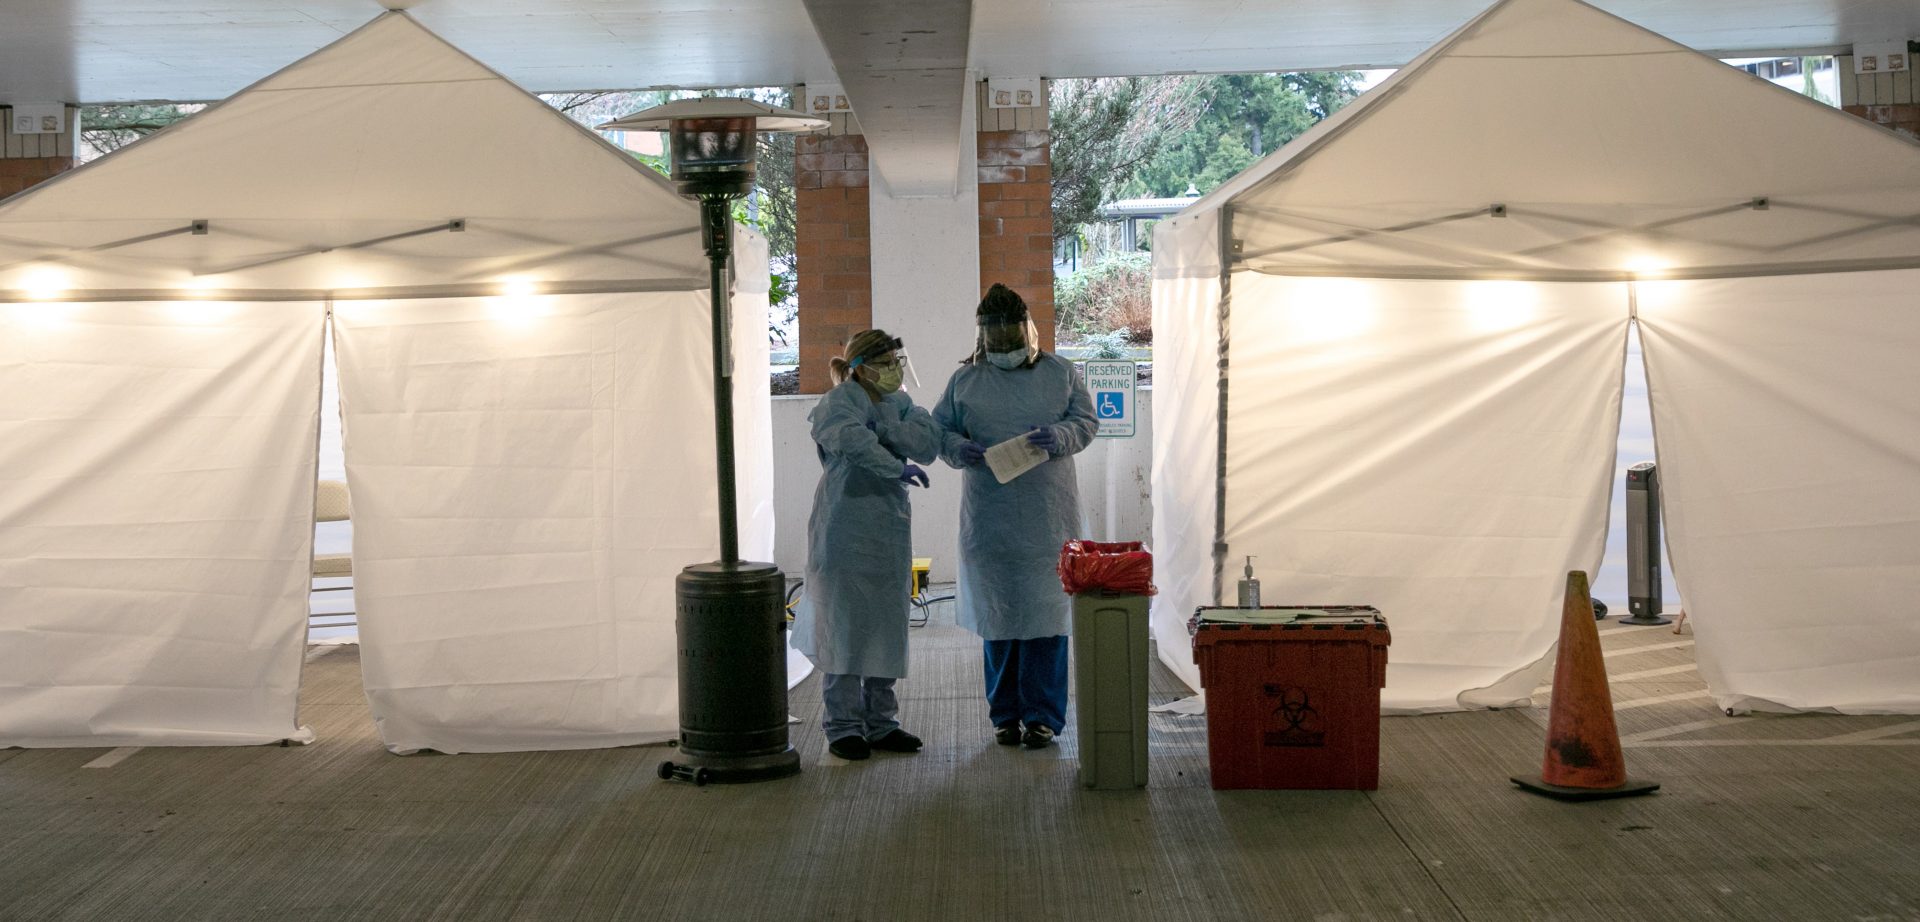 Nurses check registration lists before testing patients for coronavirus at the University of Washington Medical Center on March 13 in Seattle.